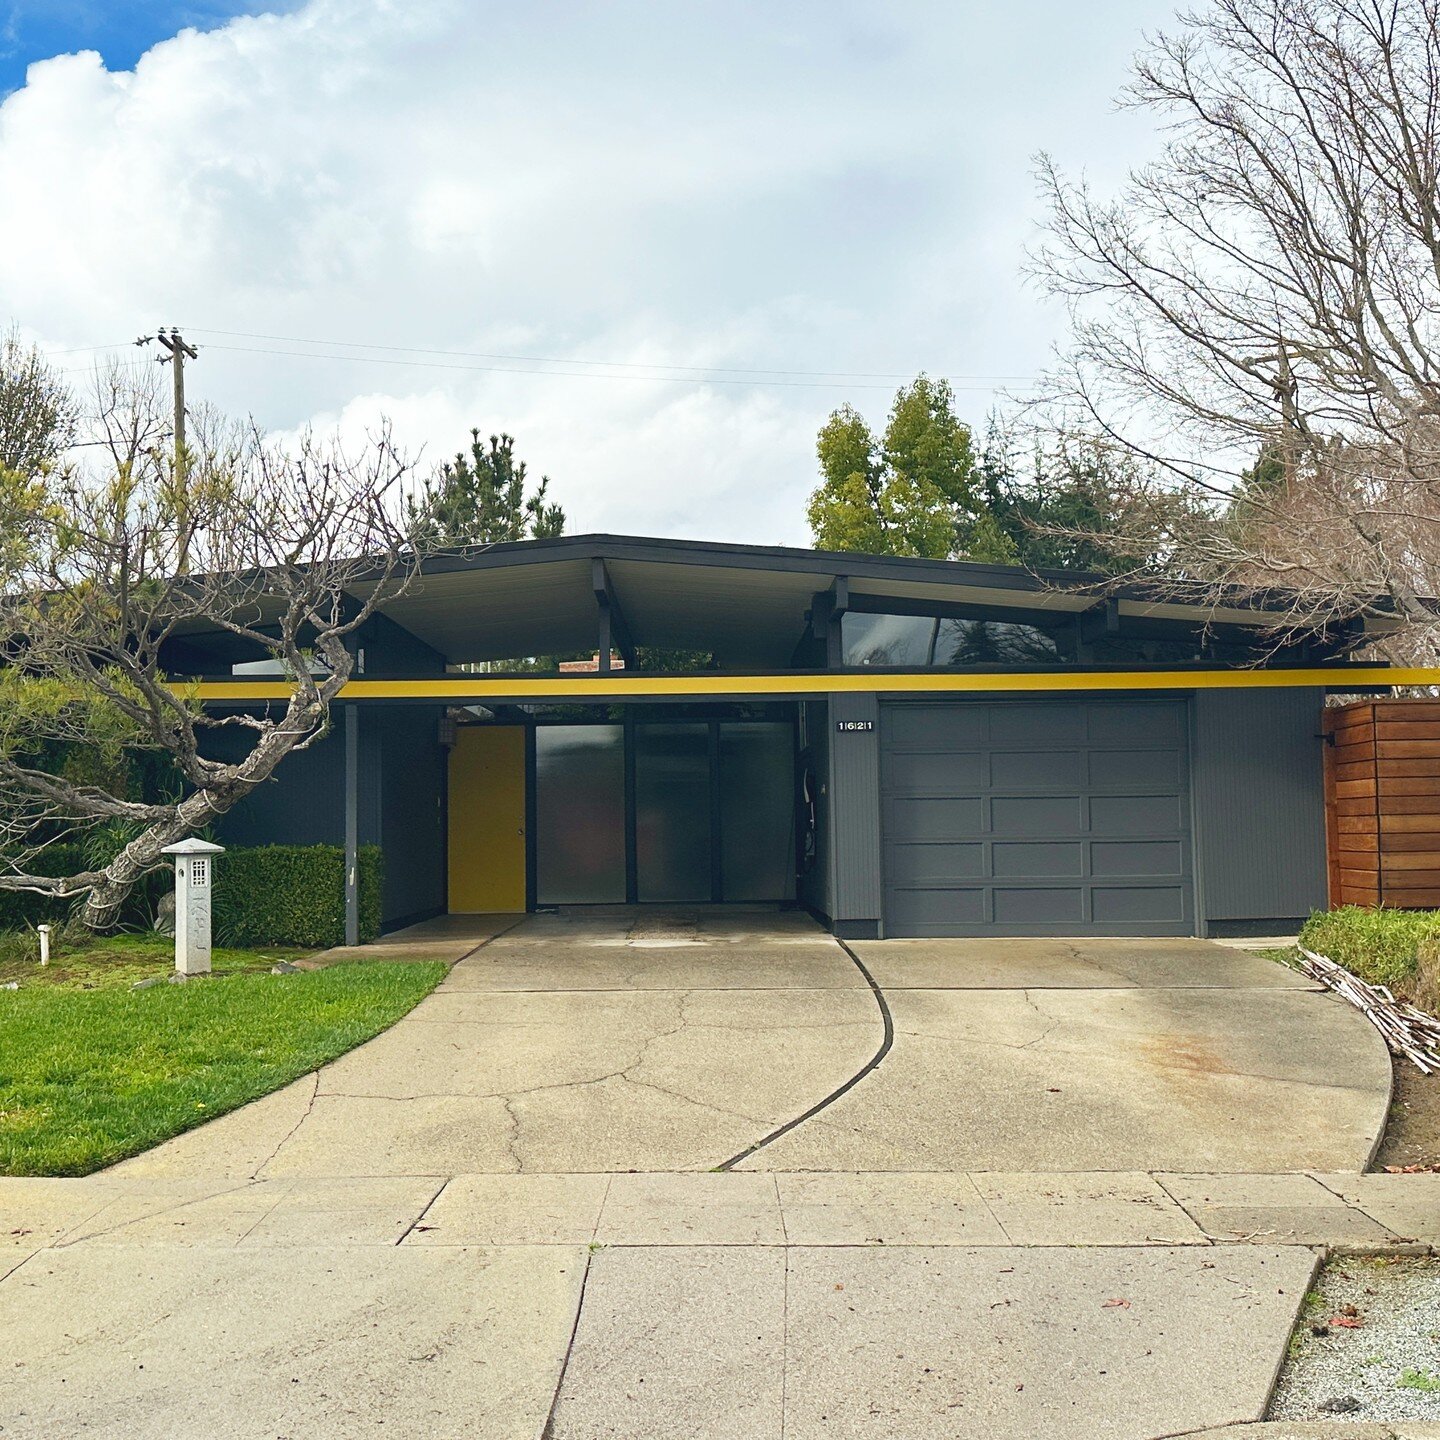 🏠✨ Spotted some serious #EichlerEyeCandy in Fairglen today! This low-gable Eichler stole the Property Nerds heart at first glance. 🌟 It's not just a house; it's a piece of mid-century modern art. The clean lines, the iconic design, the way it seaml